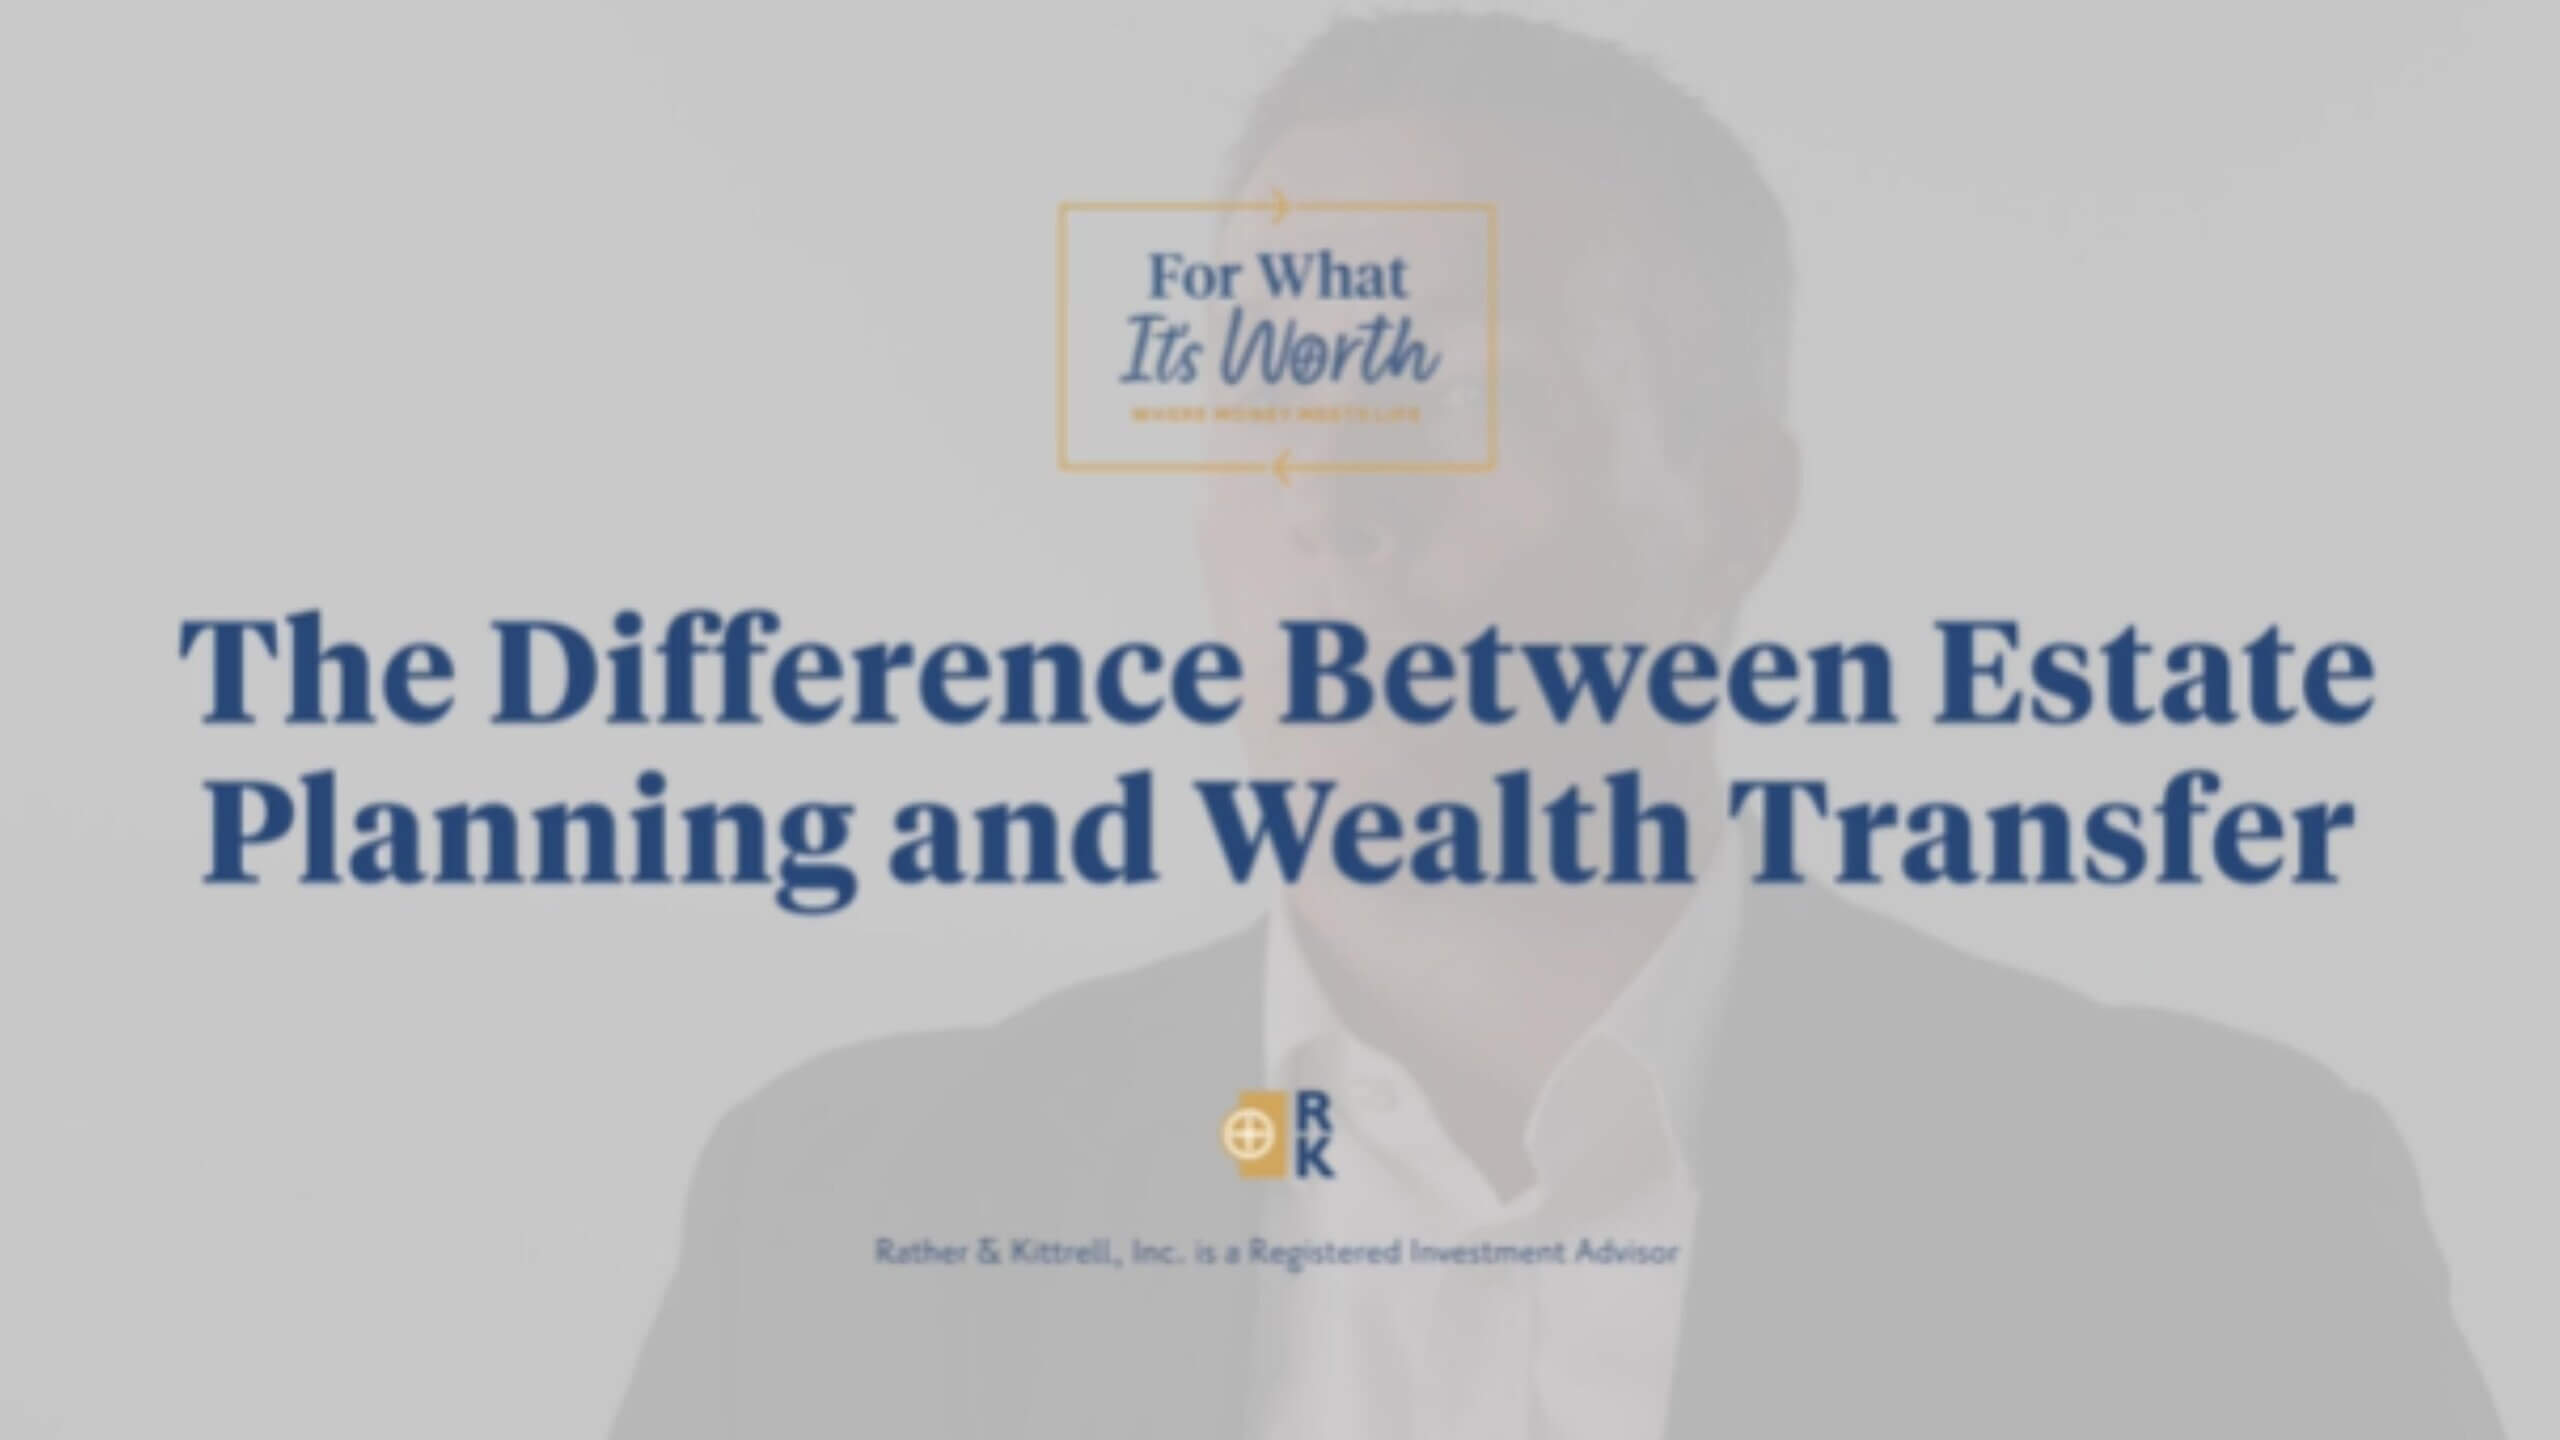 The difference between estate planning and wealth transfer